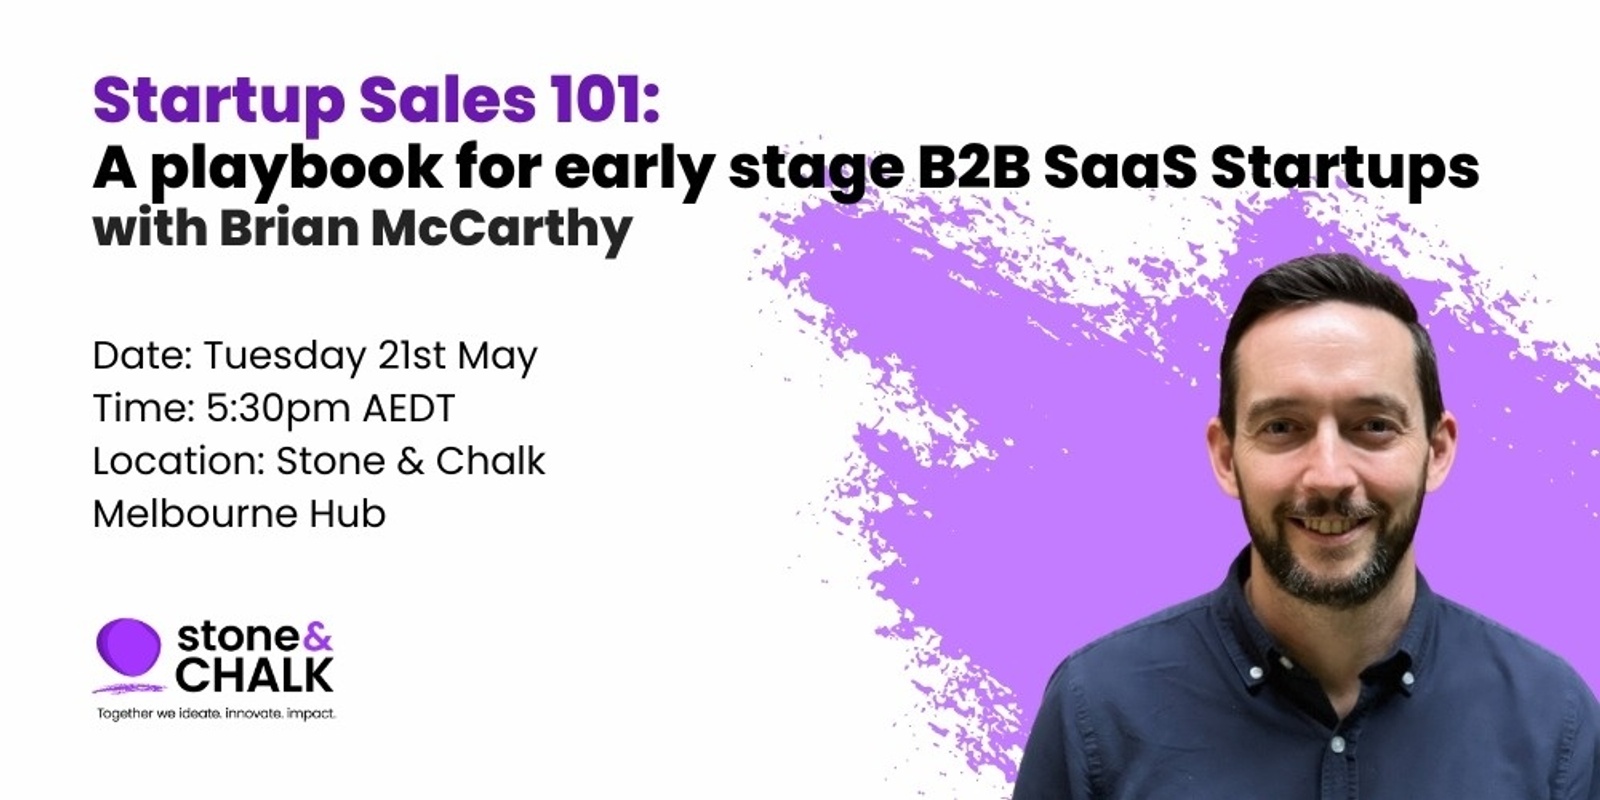 Banner image for Startup Sales 101: A playbook for early stage B2B SaaS startups - with Brian McCarthy